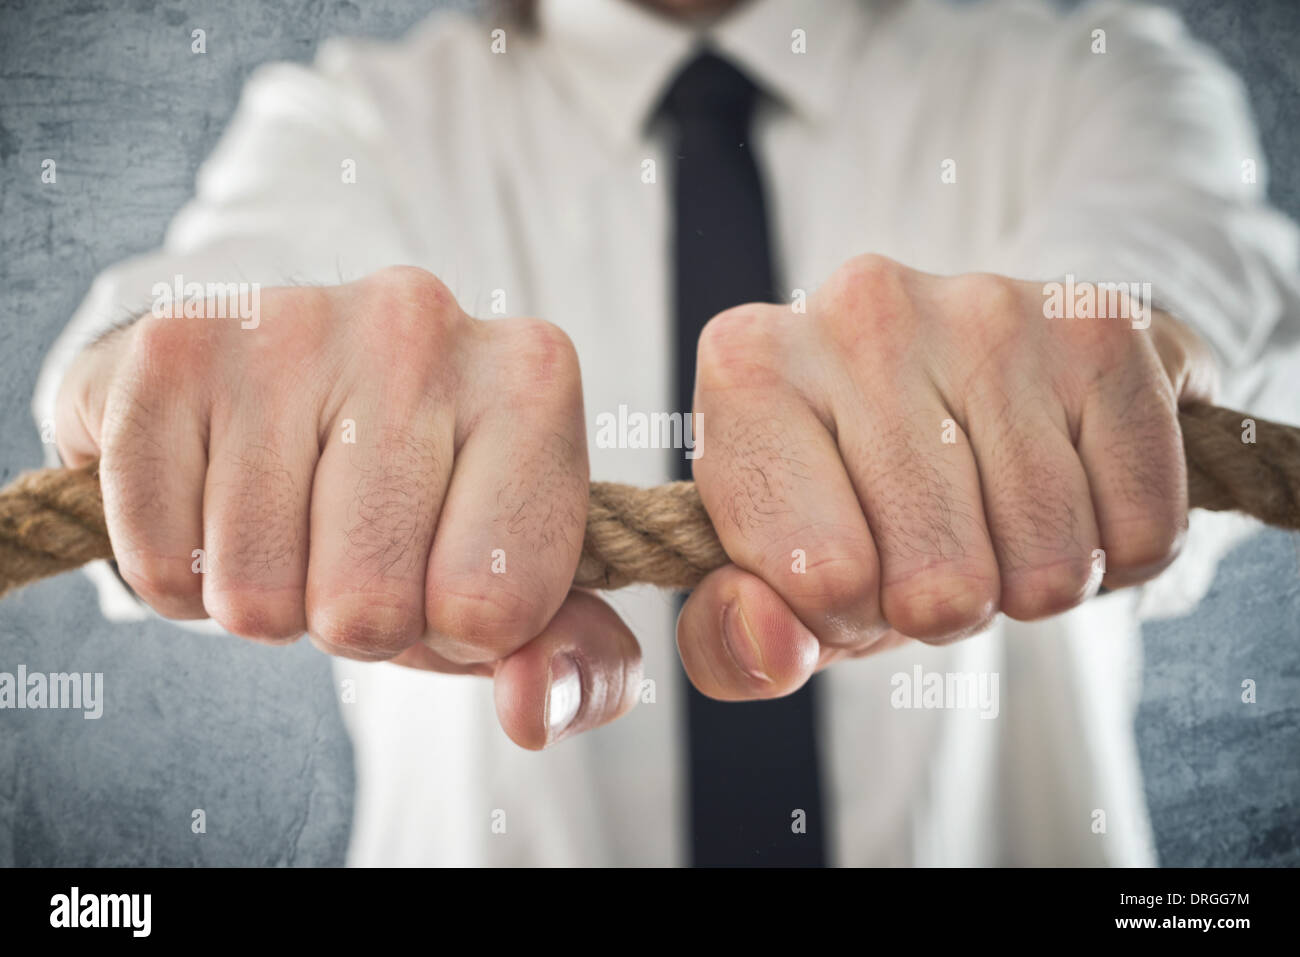 Businessman holding tight to a rope. Concept of business problems, difficult business situation. Stock Photo